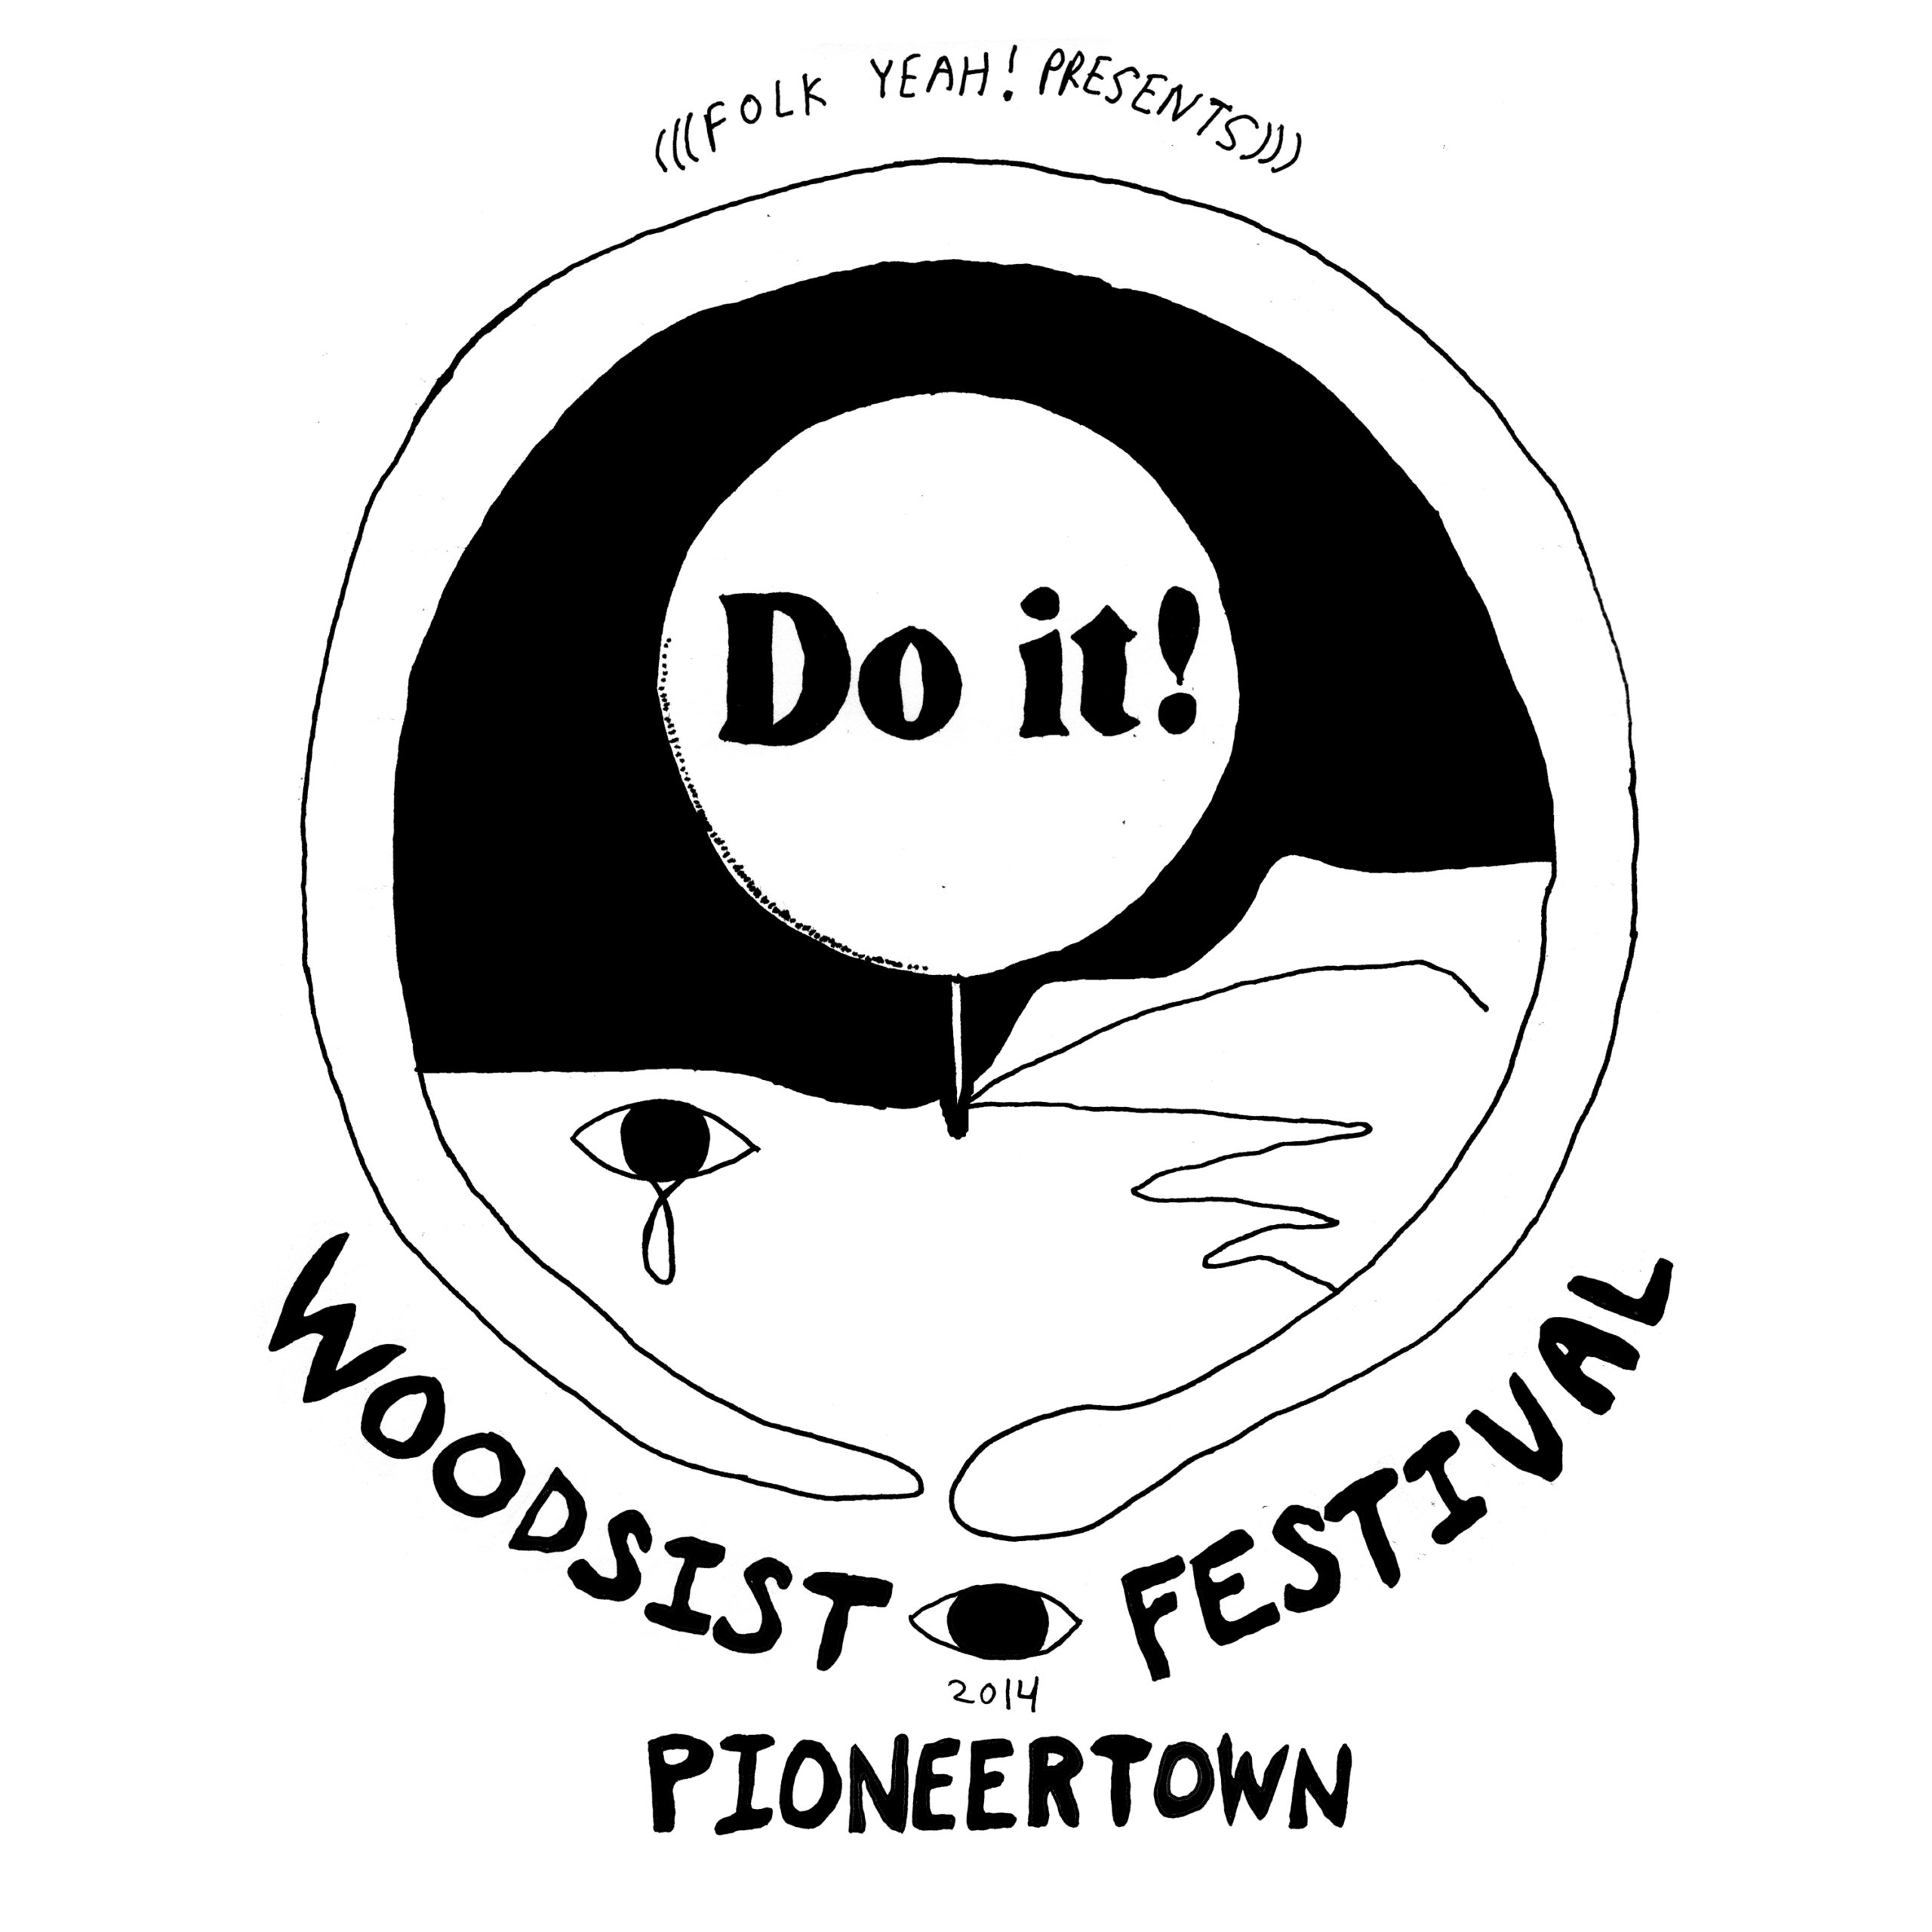 Woodsist Fest announces Pioneertown event Aug. 16 feat. Foxygen, Woods, McCombs Skiffle Band, Fresh & Onlys, Peaking Lights & more!